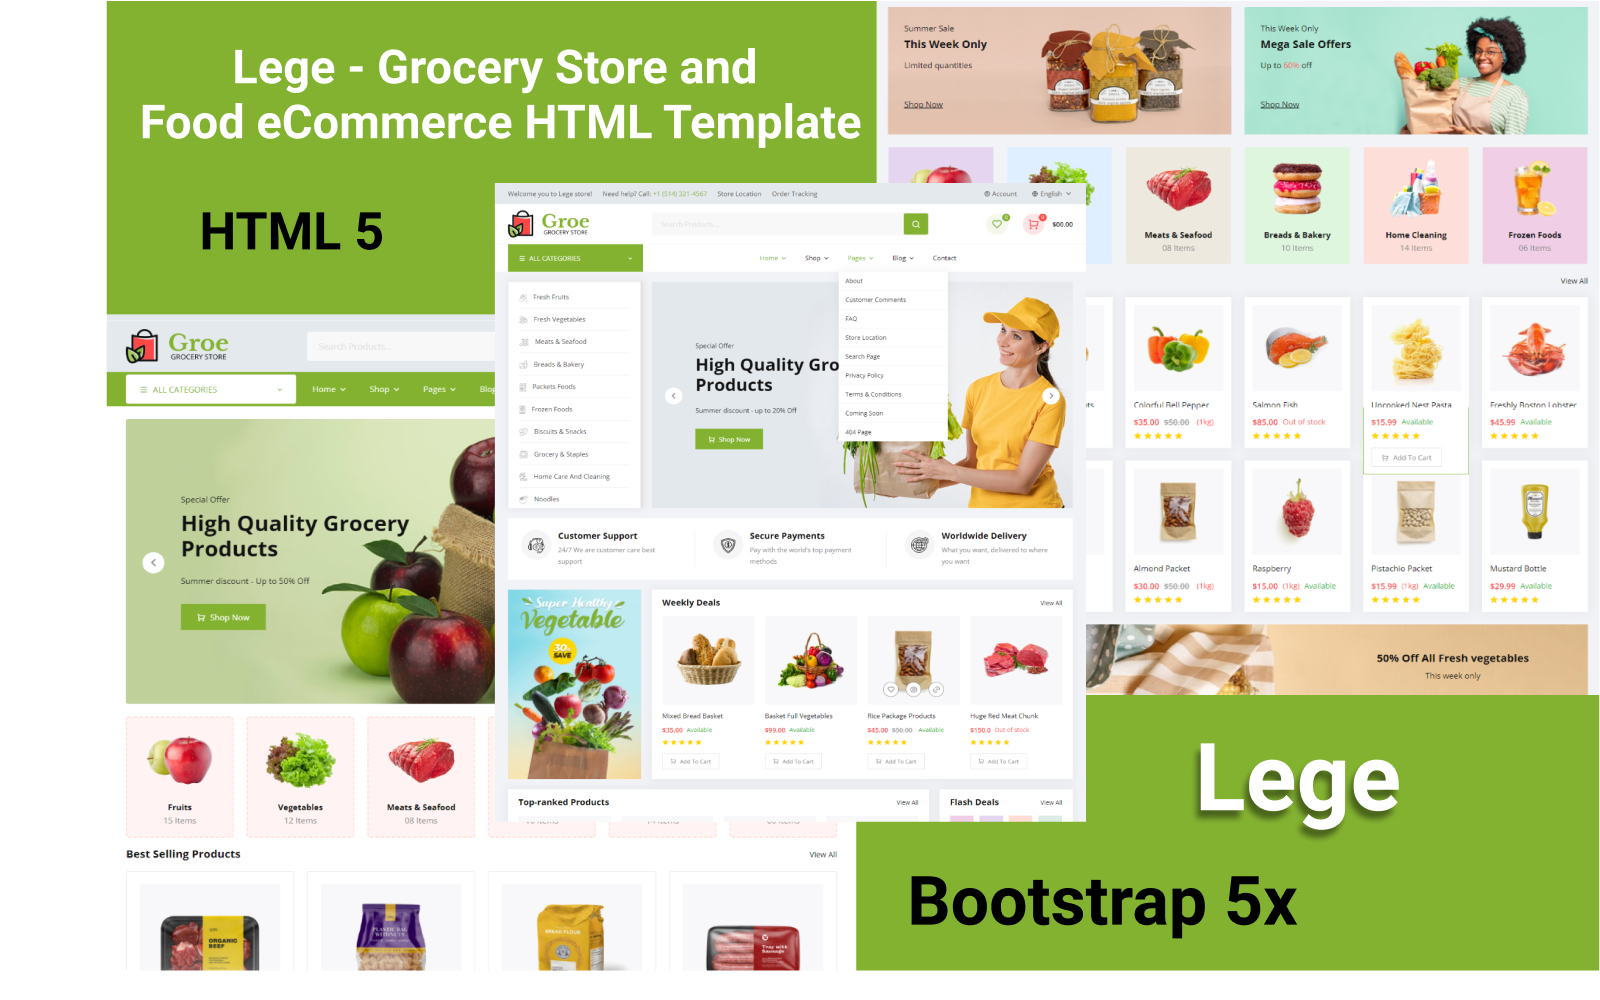 Lege - Grocery Store and Food eCommerce HTML Template